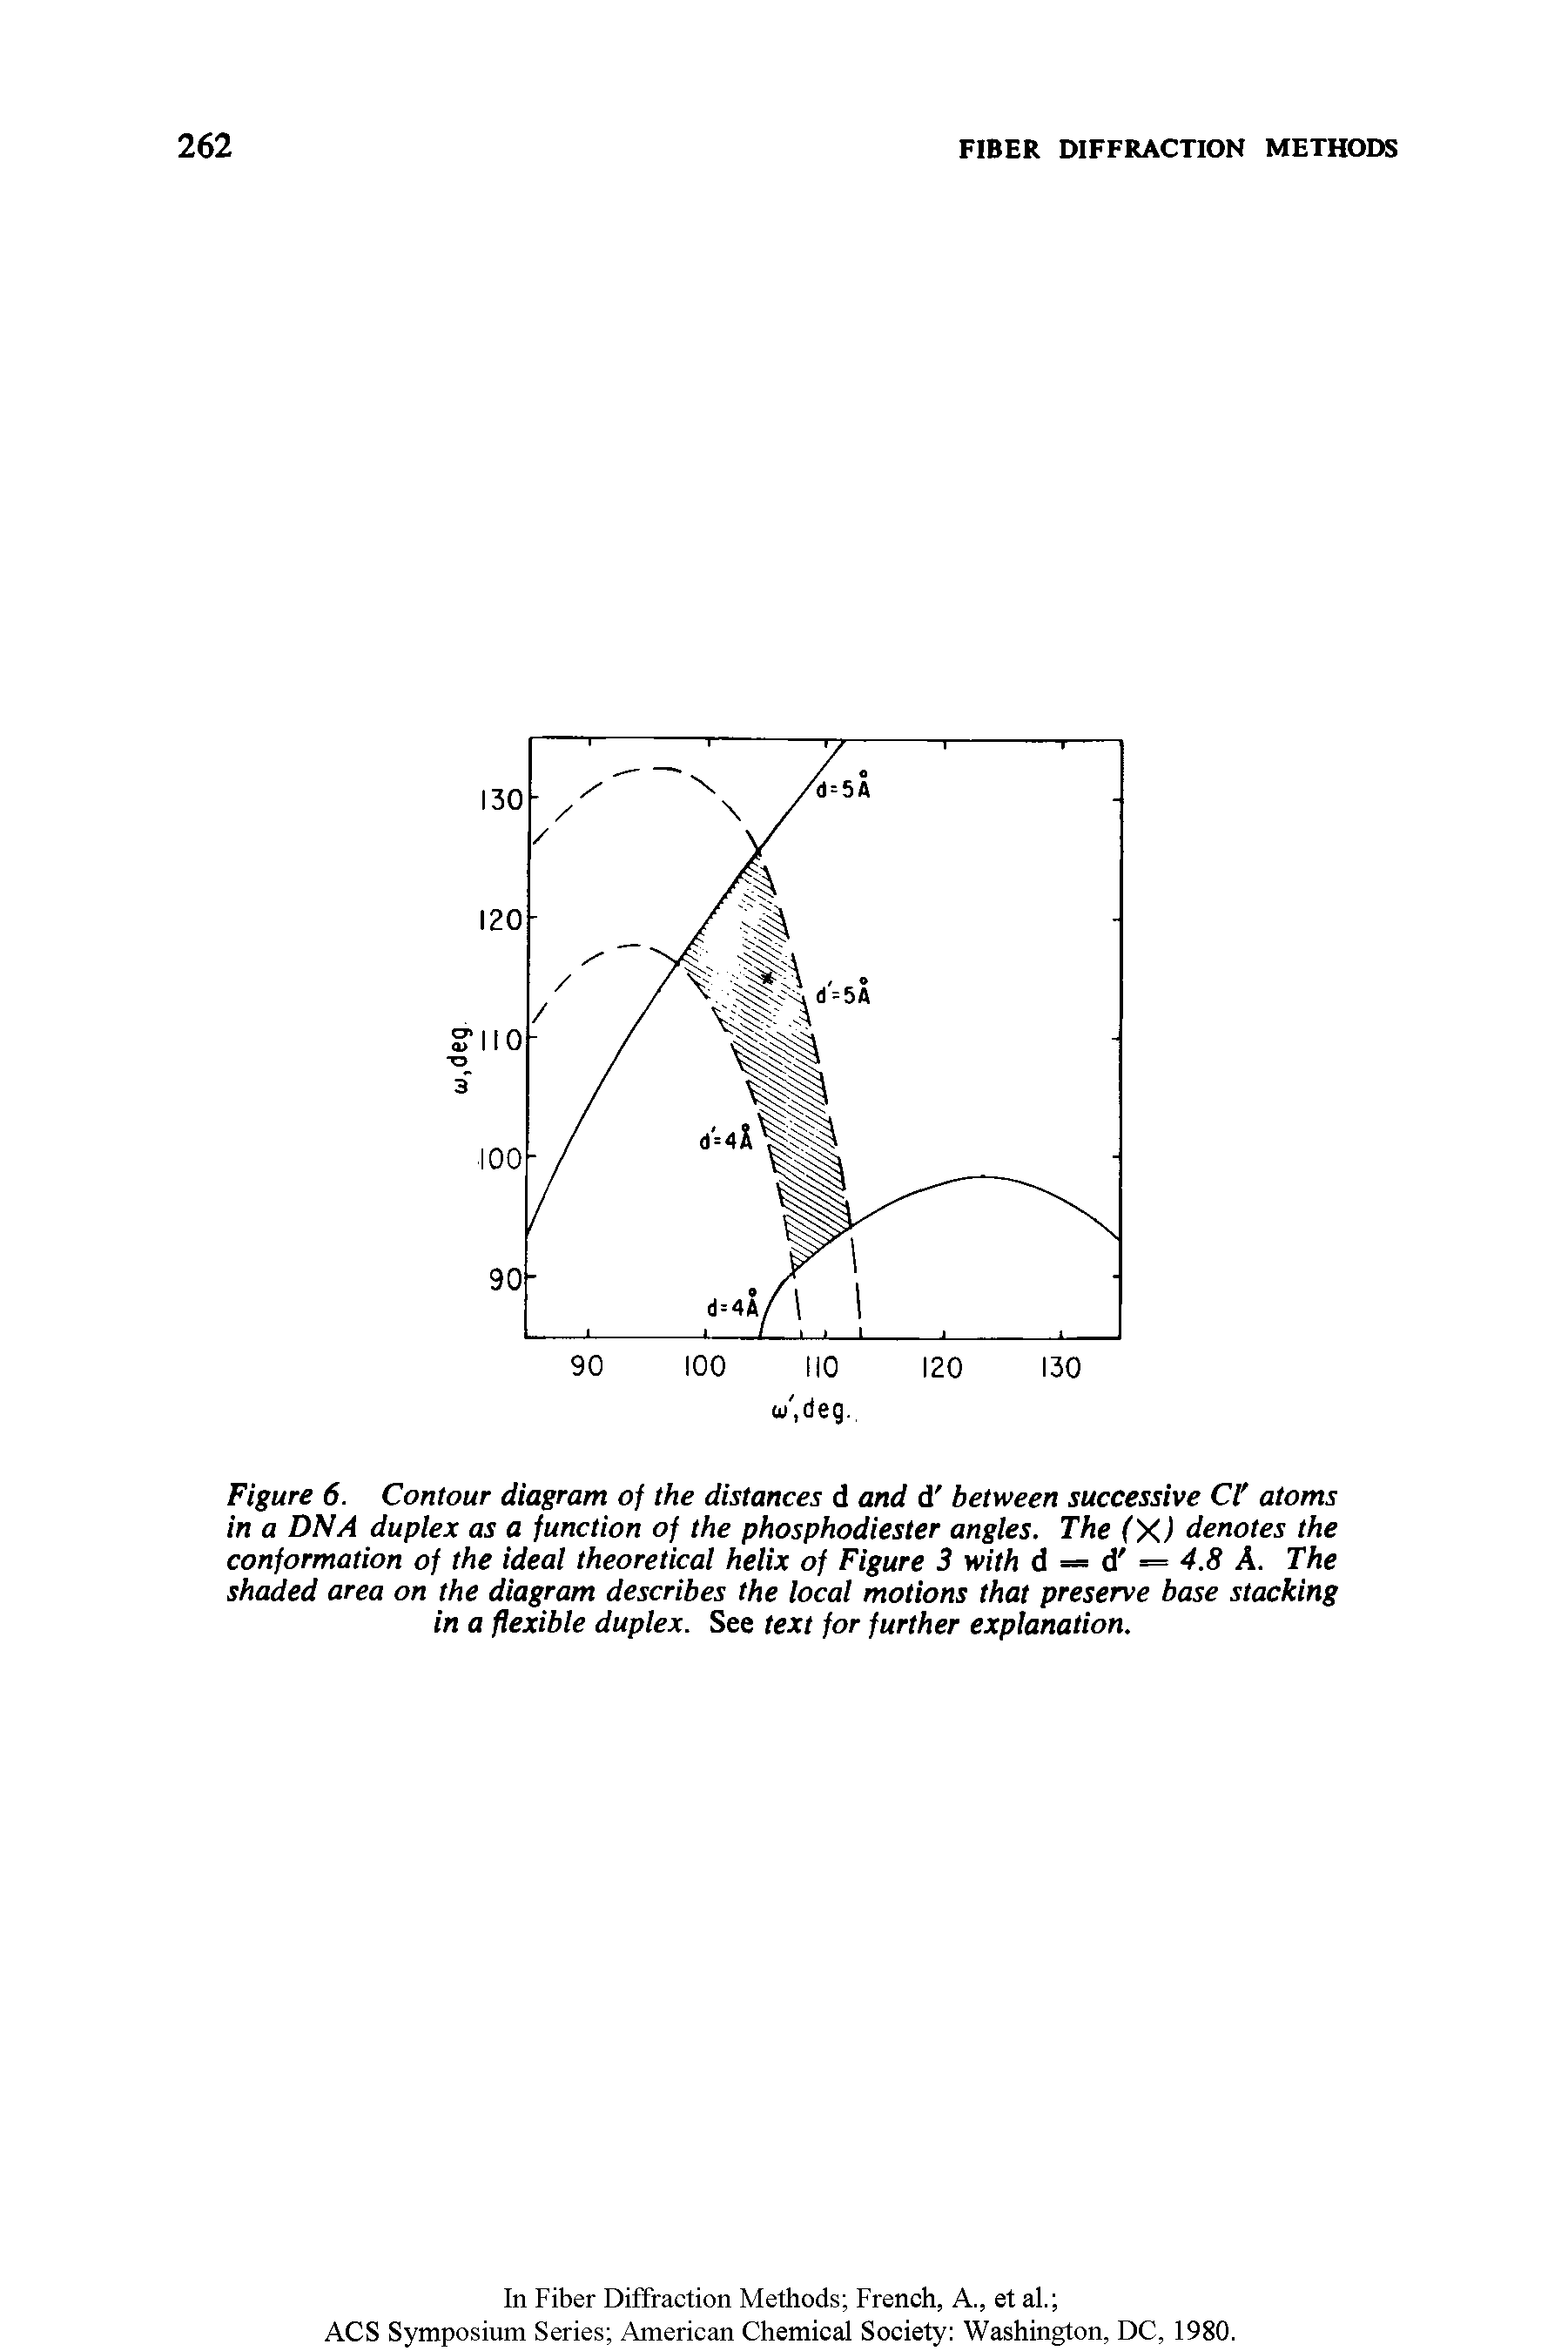 Figure 6. Contour diagram of the distances d and d between successive Cl atoms in a DNA duplex as a function of the phosphodiester angles. The (X) denotes the conformation of the ideal theoretical helix of Figure 3 with d = d = 4.8 A. The shaded area on the diagram describes the local motions that preserve base stacking in a flexible duplex. See text for further explanation.